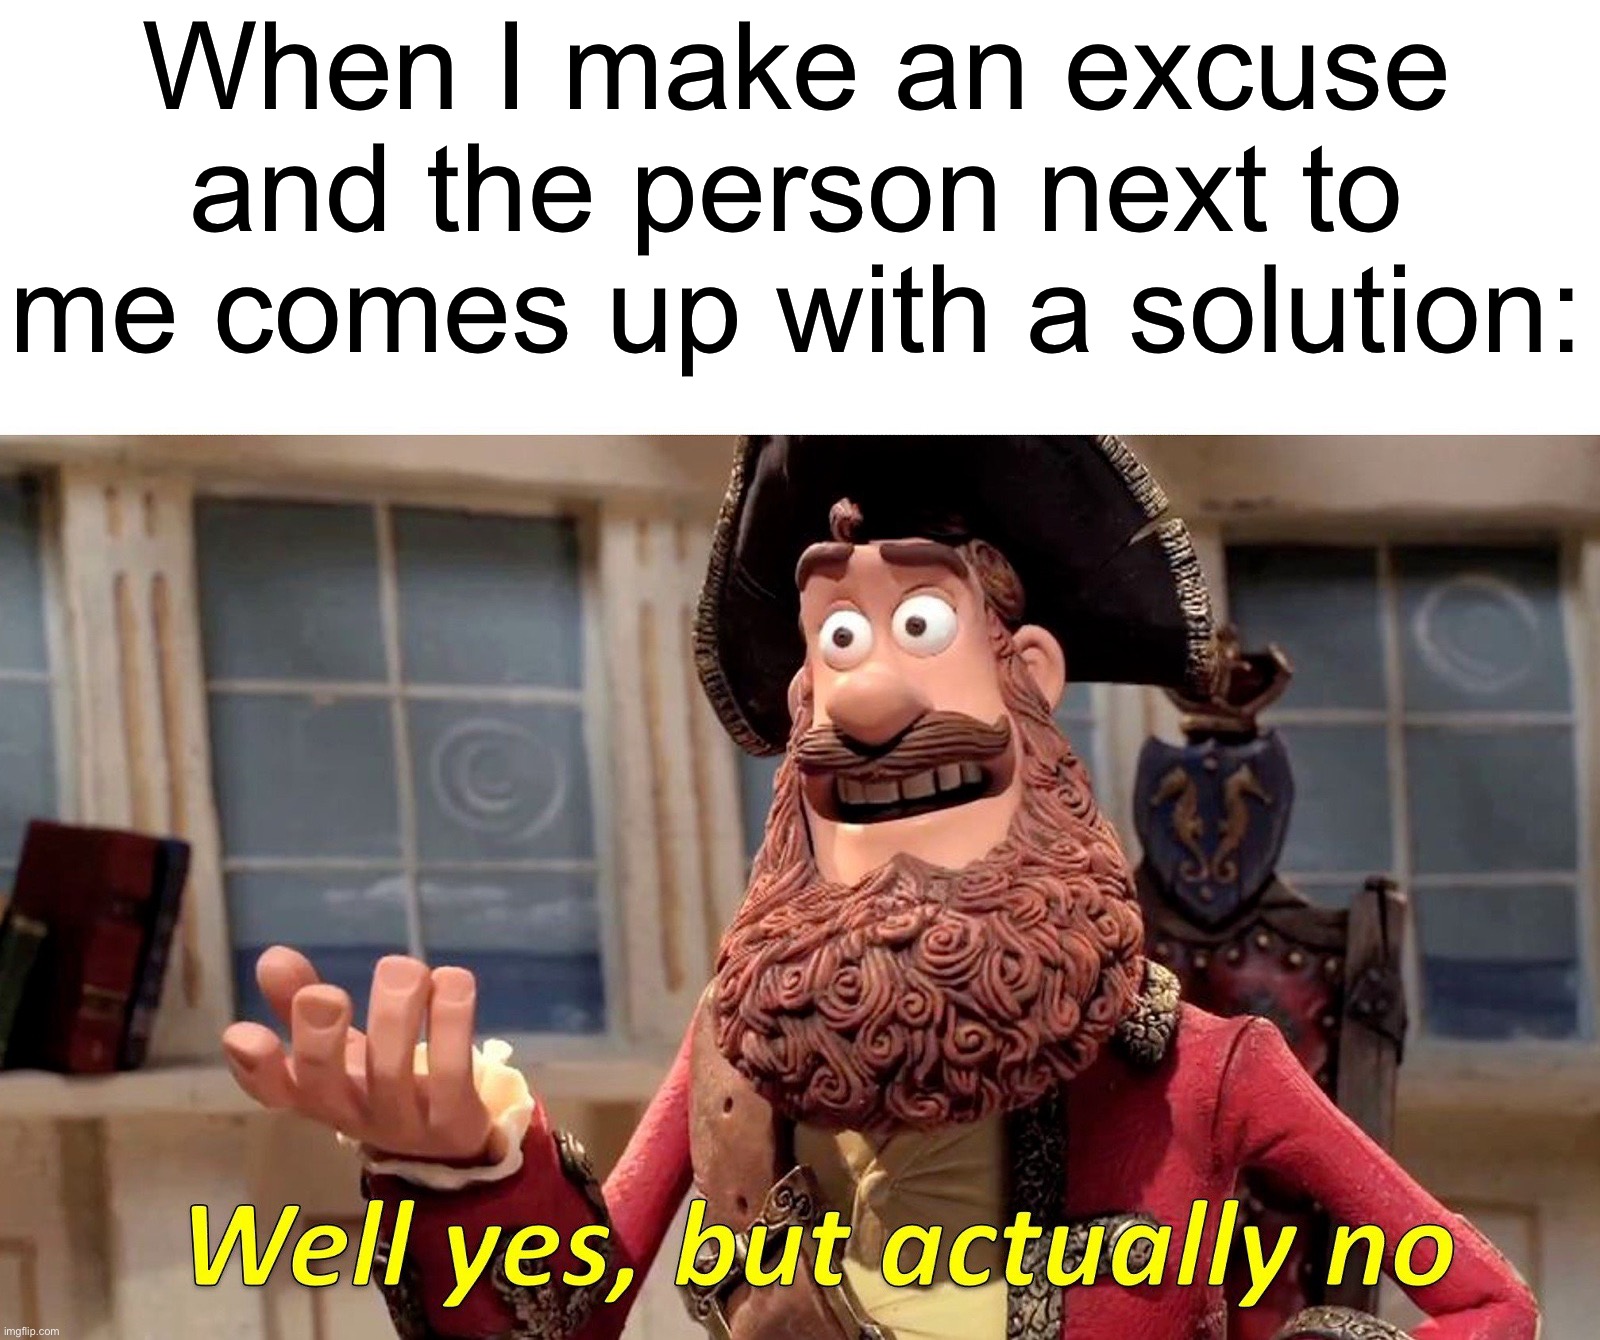 I’m not listening to them | When I make an excuse and the person next to me comes up with a solution: | image tagged in memes,well yes but actually no,funny,true story,relatable memes,oh no | made w/ Imgflip meme maker